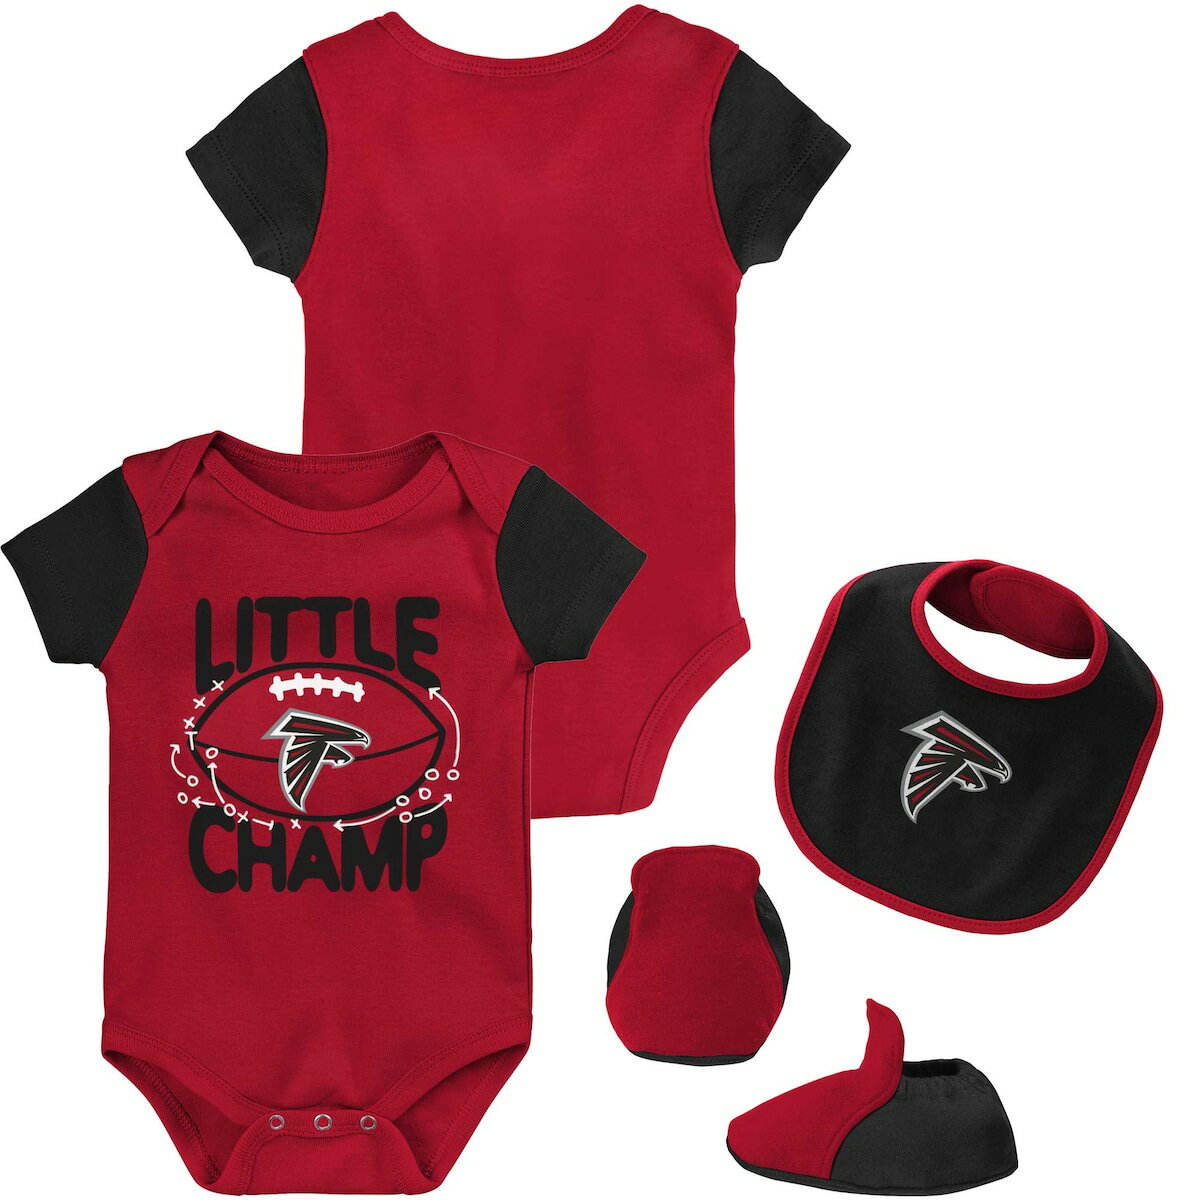 Let your little champ show off their blossoming Atlanta Falcons fandom in this adorable set. The bodysuit and bib feature vibrant Atlanta Falcons graphics as well as adjustable closures for easy accessibility. Pair them with the matching booties and you'll get the perfect outfit for your tiny bundle of joy.Brand: OuterstuffOfficially licensedMachine wash, tumble dry lowLap shoulder necklineMaterial: 100% CottonShort sleeveScreen print graphicsImportedThree snaps at bottom of bodysuitHook and loop closure on bibSet includes bodysuit, bib and booties